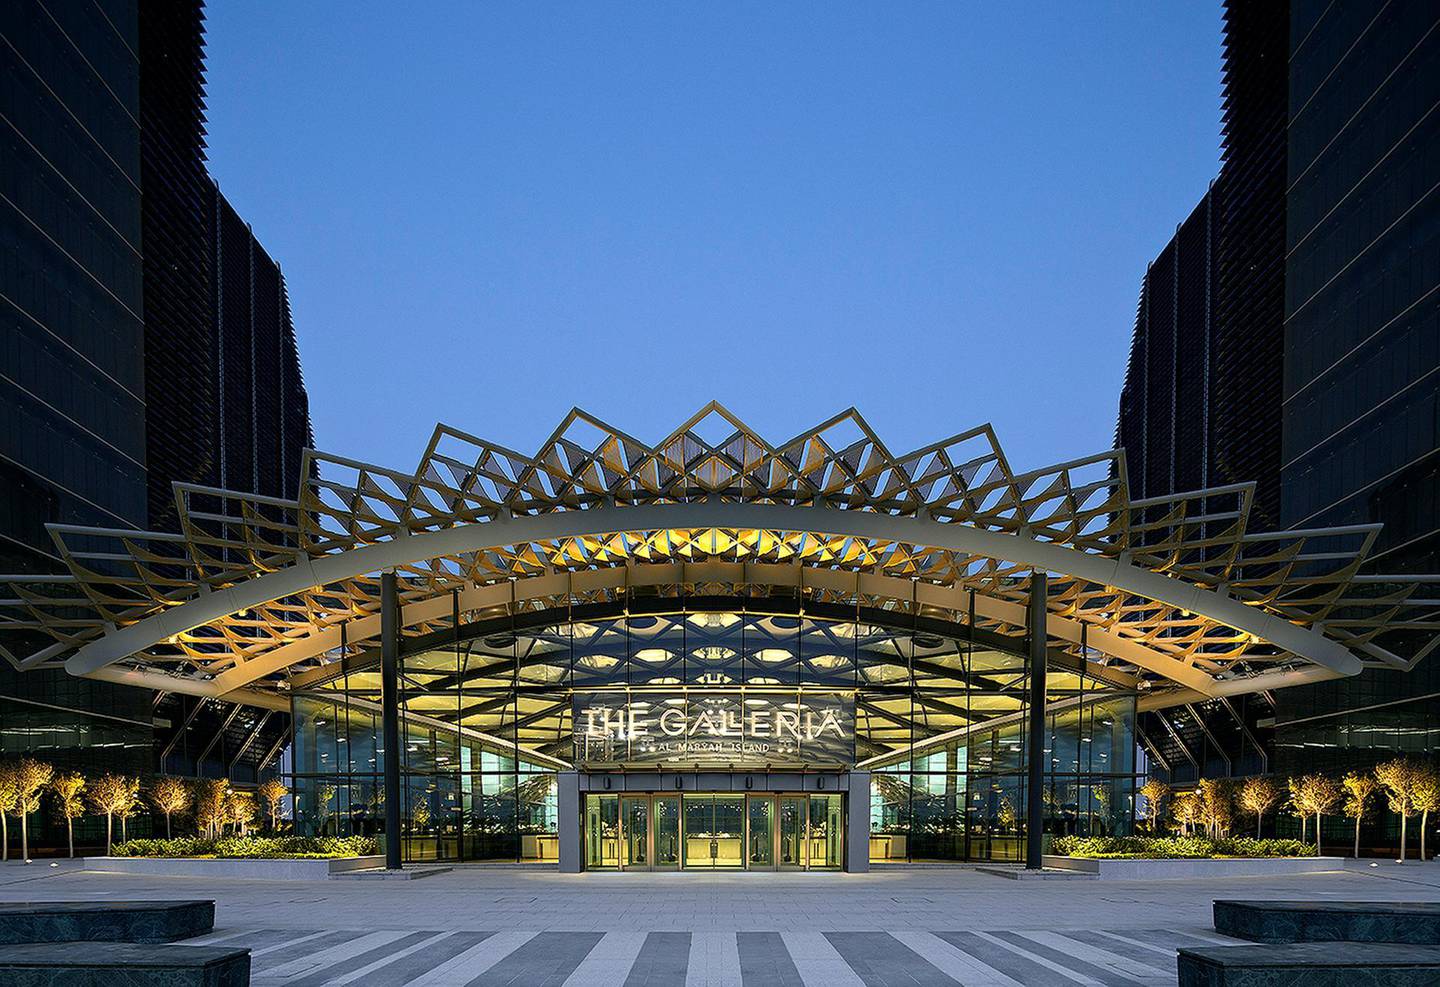 the front of the Galleria Mall, Abu Dhabi
CREDIT: Courtesy The Galleria